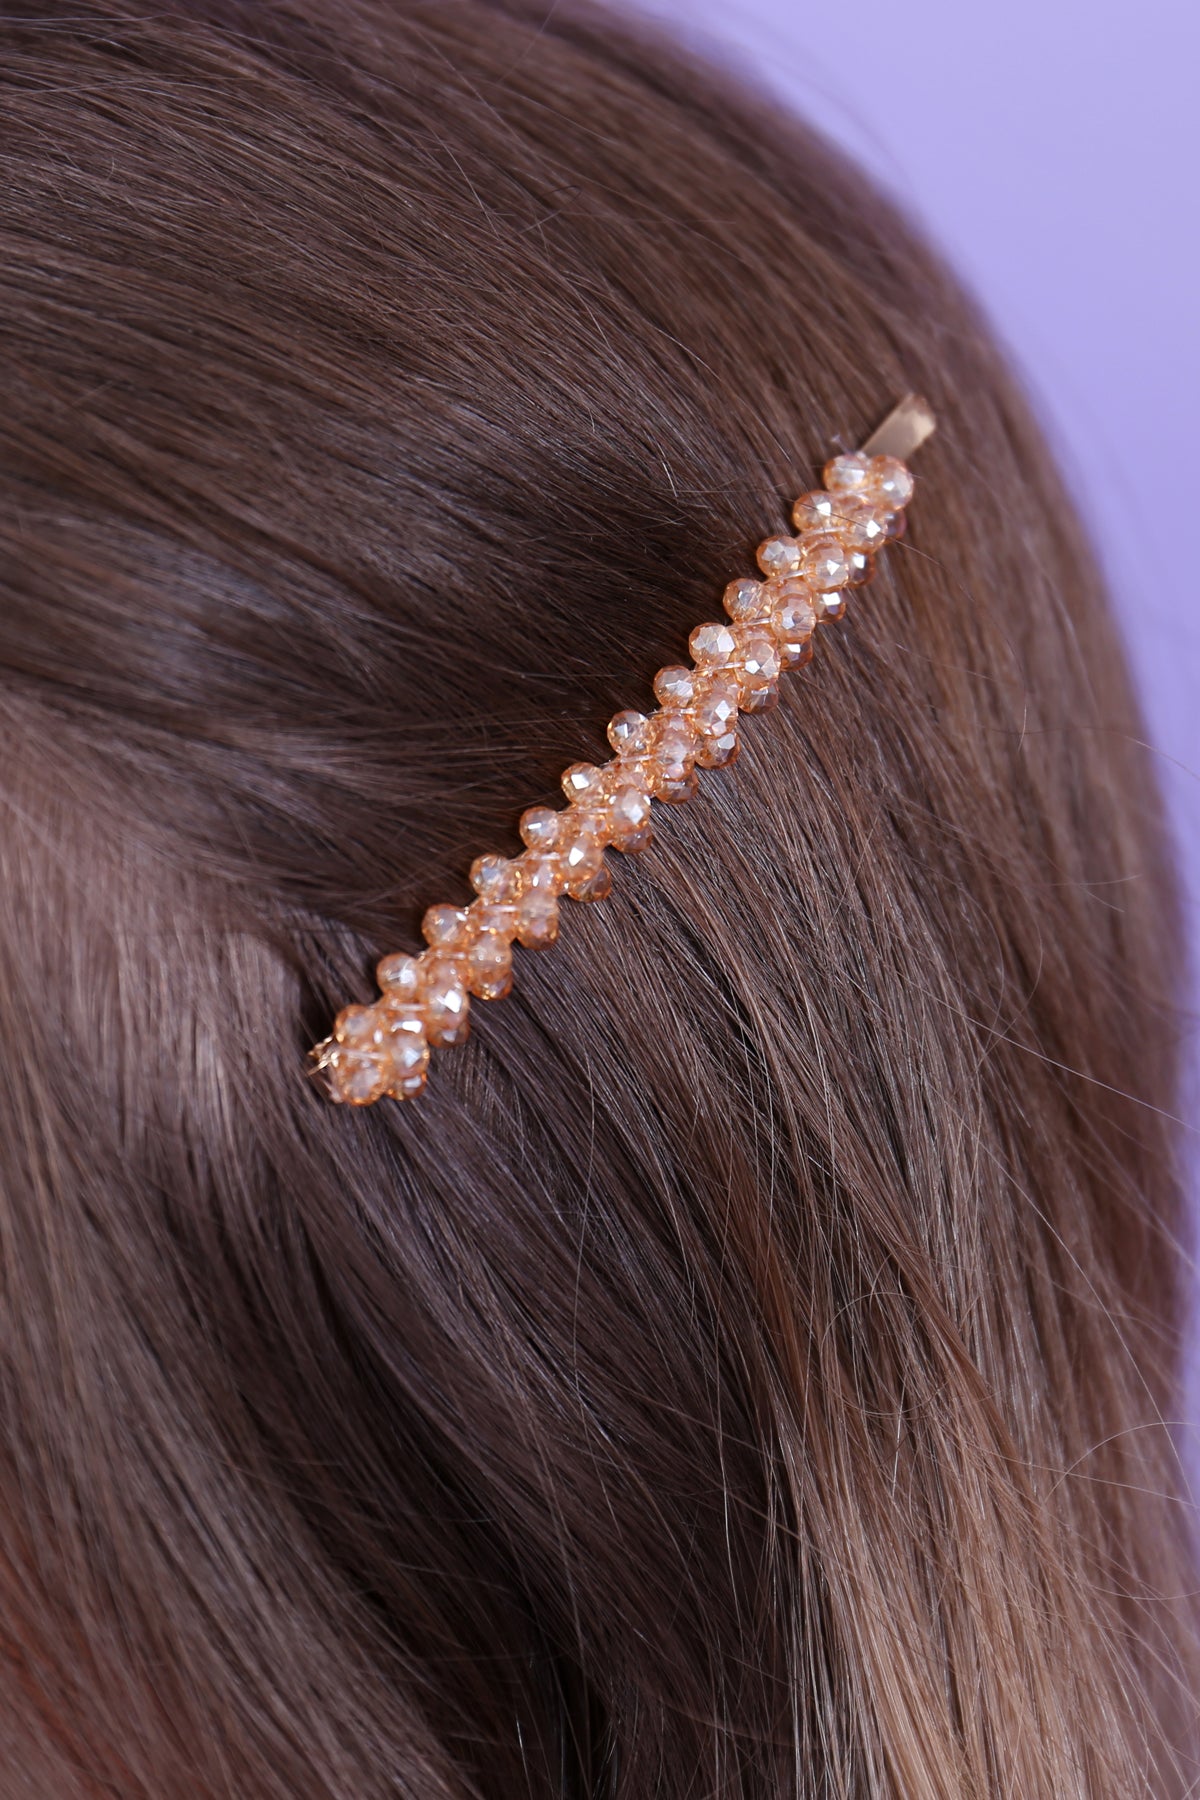 GLASS BEADS AND PEARL HAIR PIN SETS/6SETS (NOW $1.75 ONLY!)